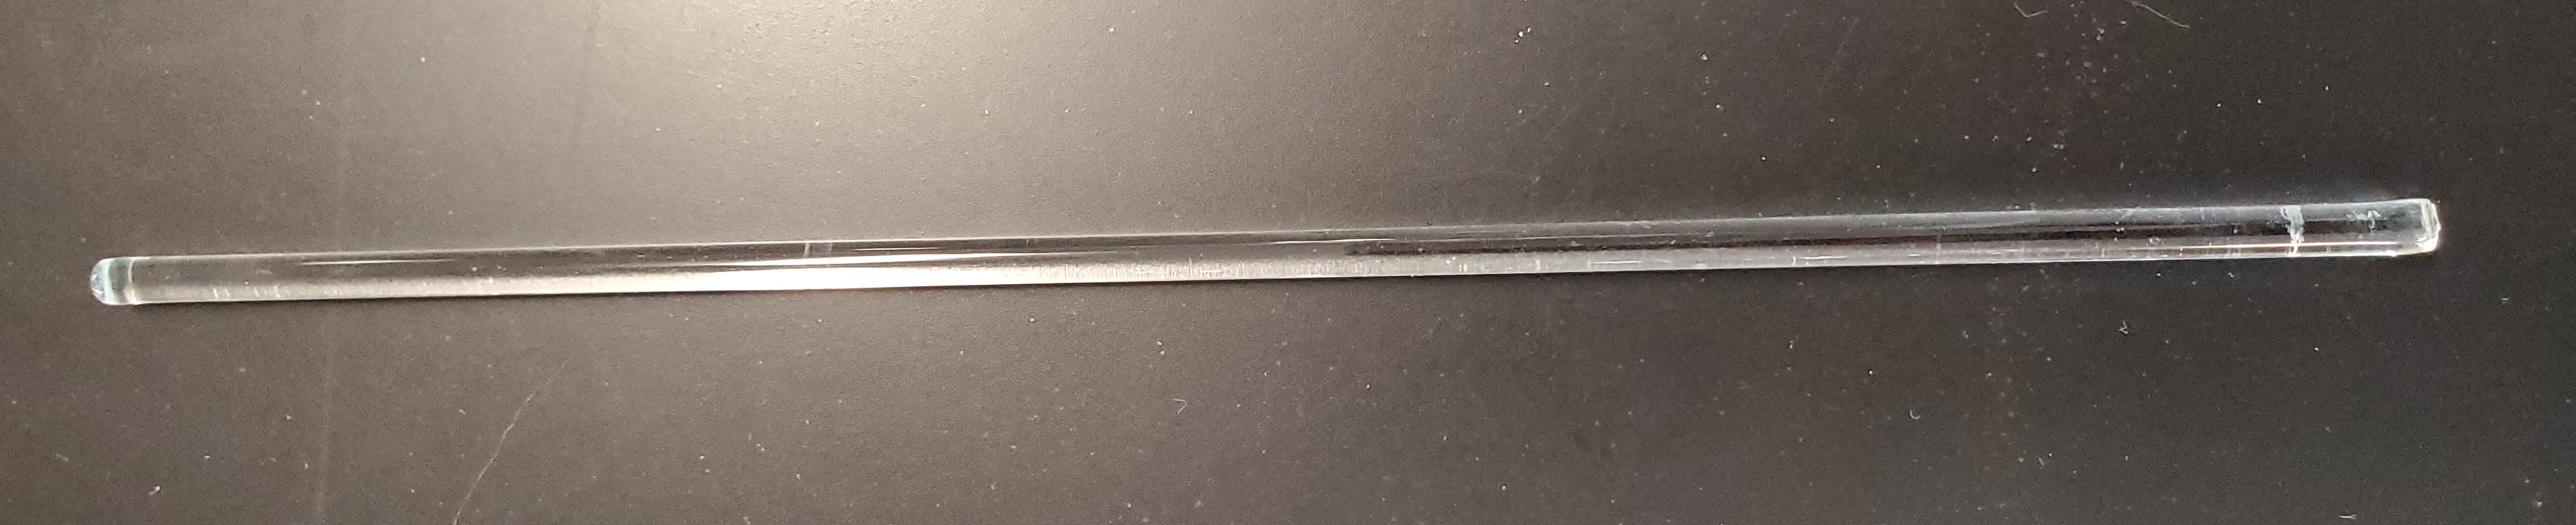 Picture of a glass stir rod